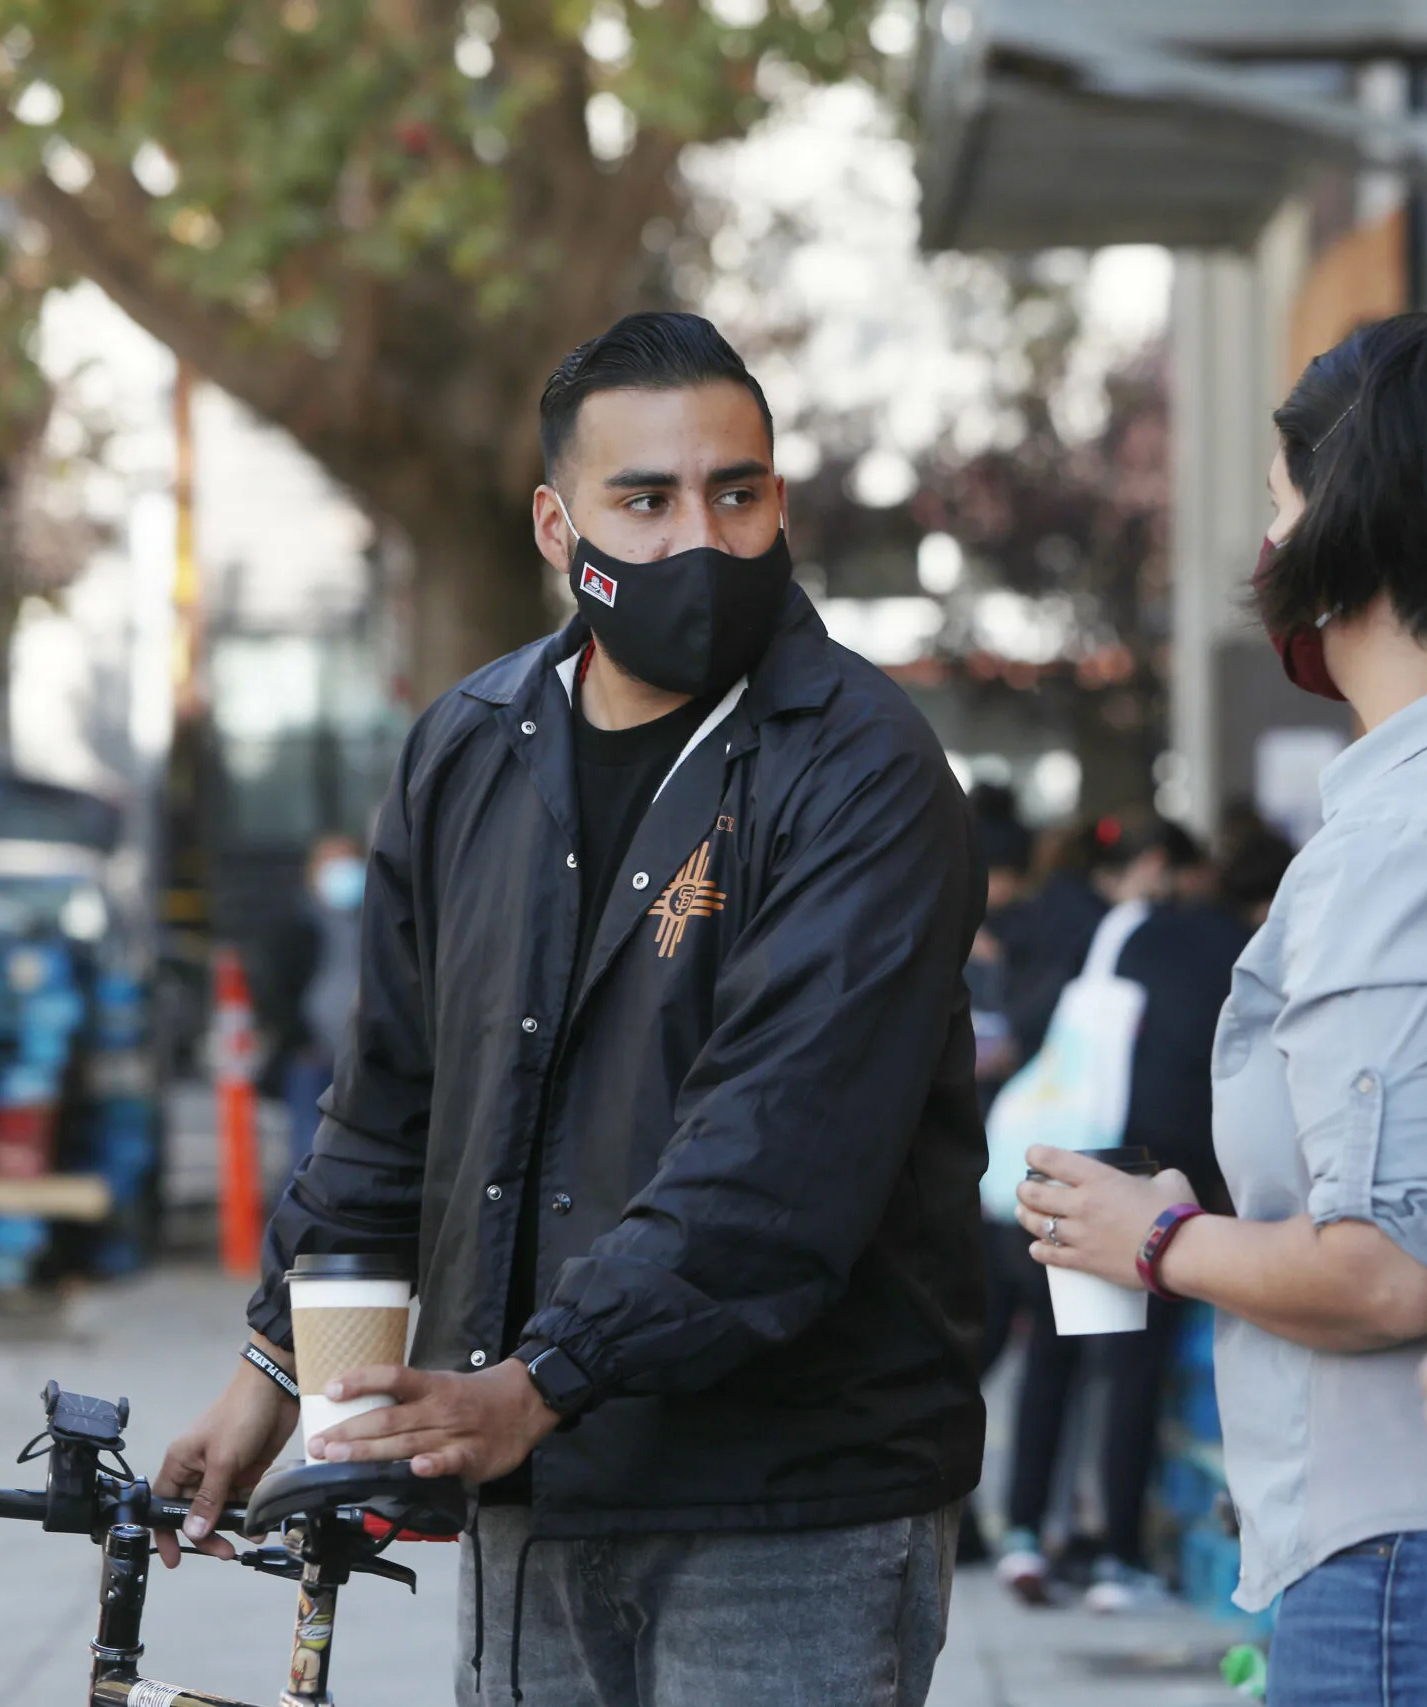 Jon Jacobo in a mask holding a coffee stands next to his bike, talking to an out-of-focus person.